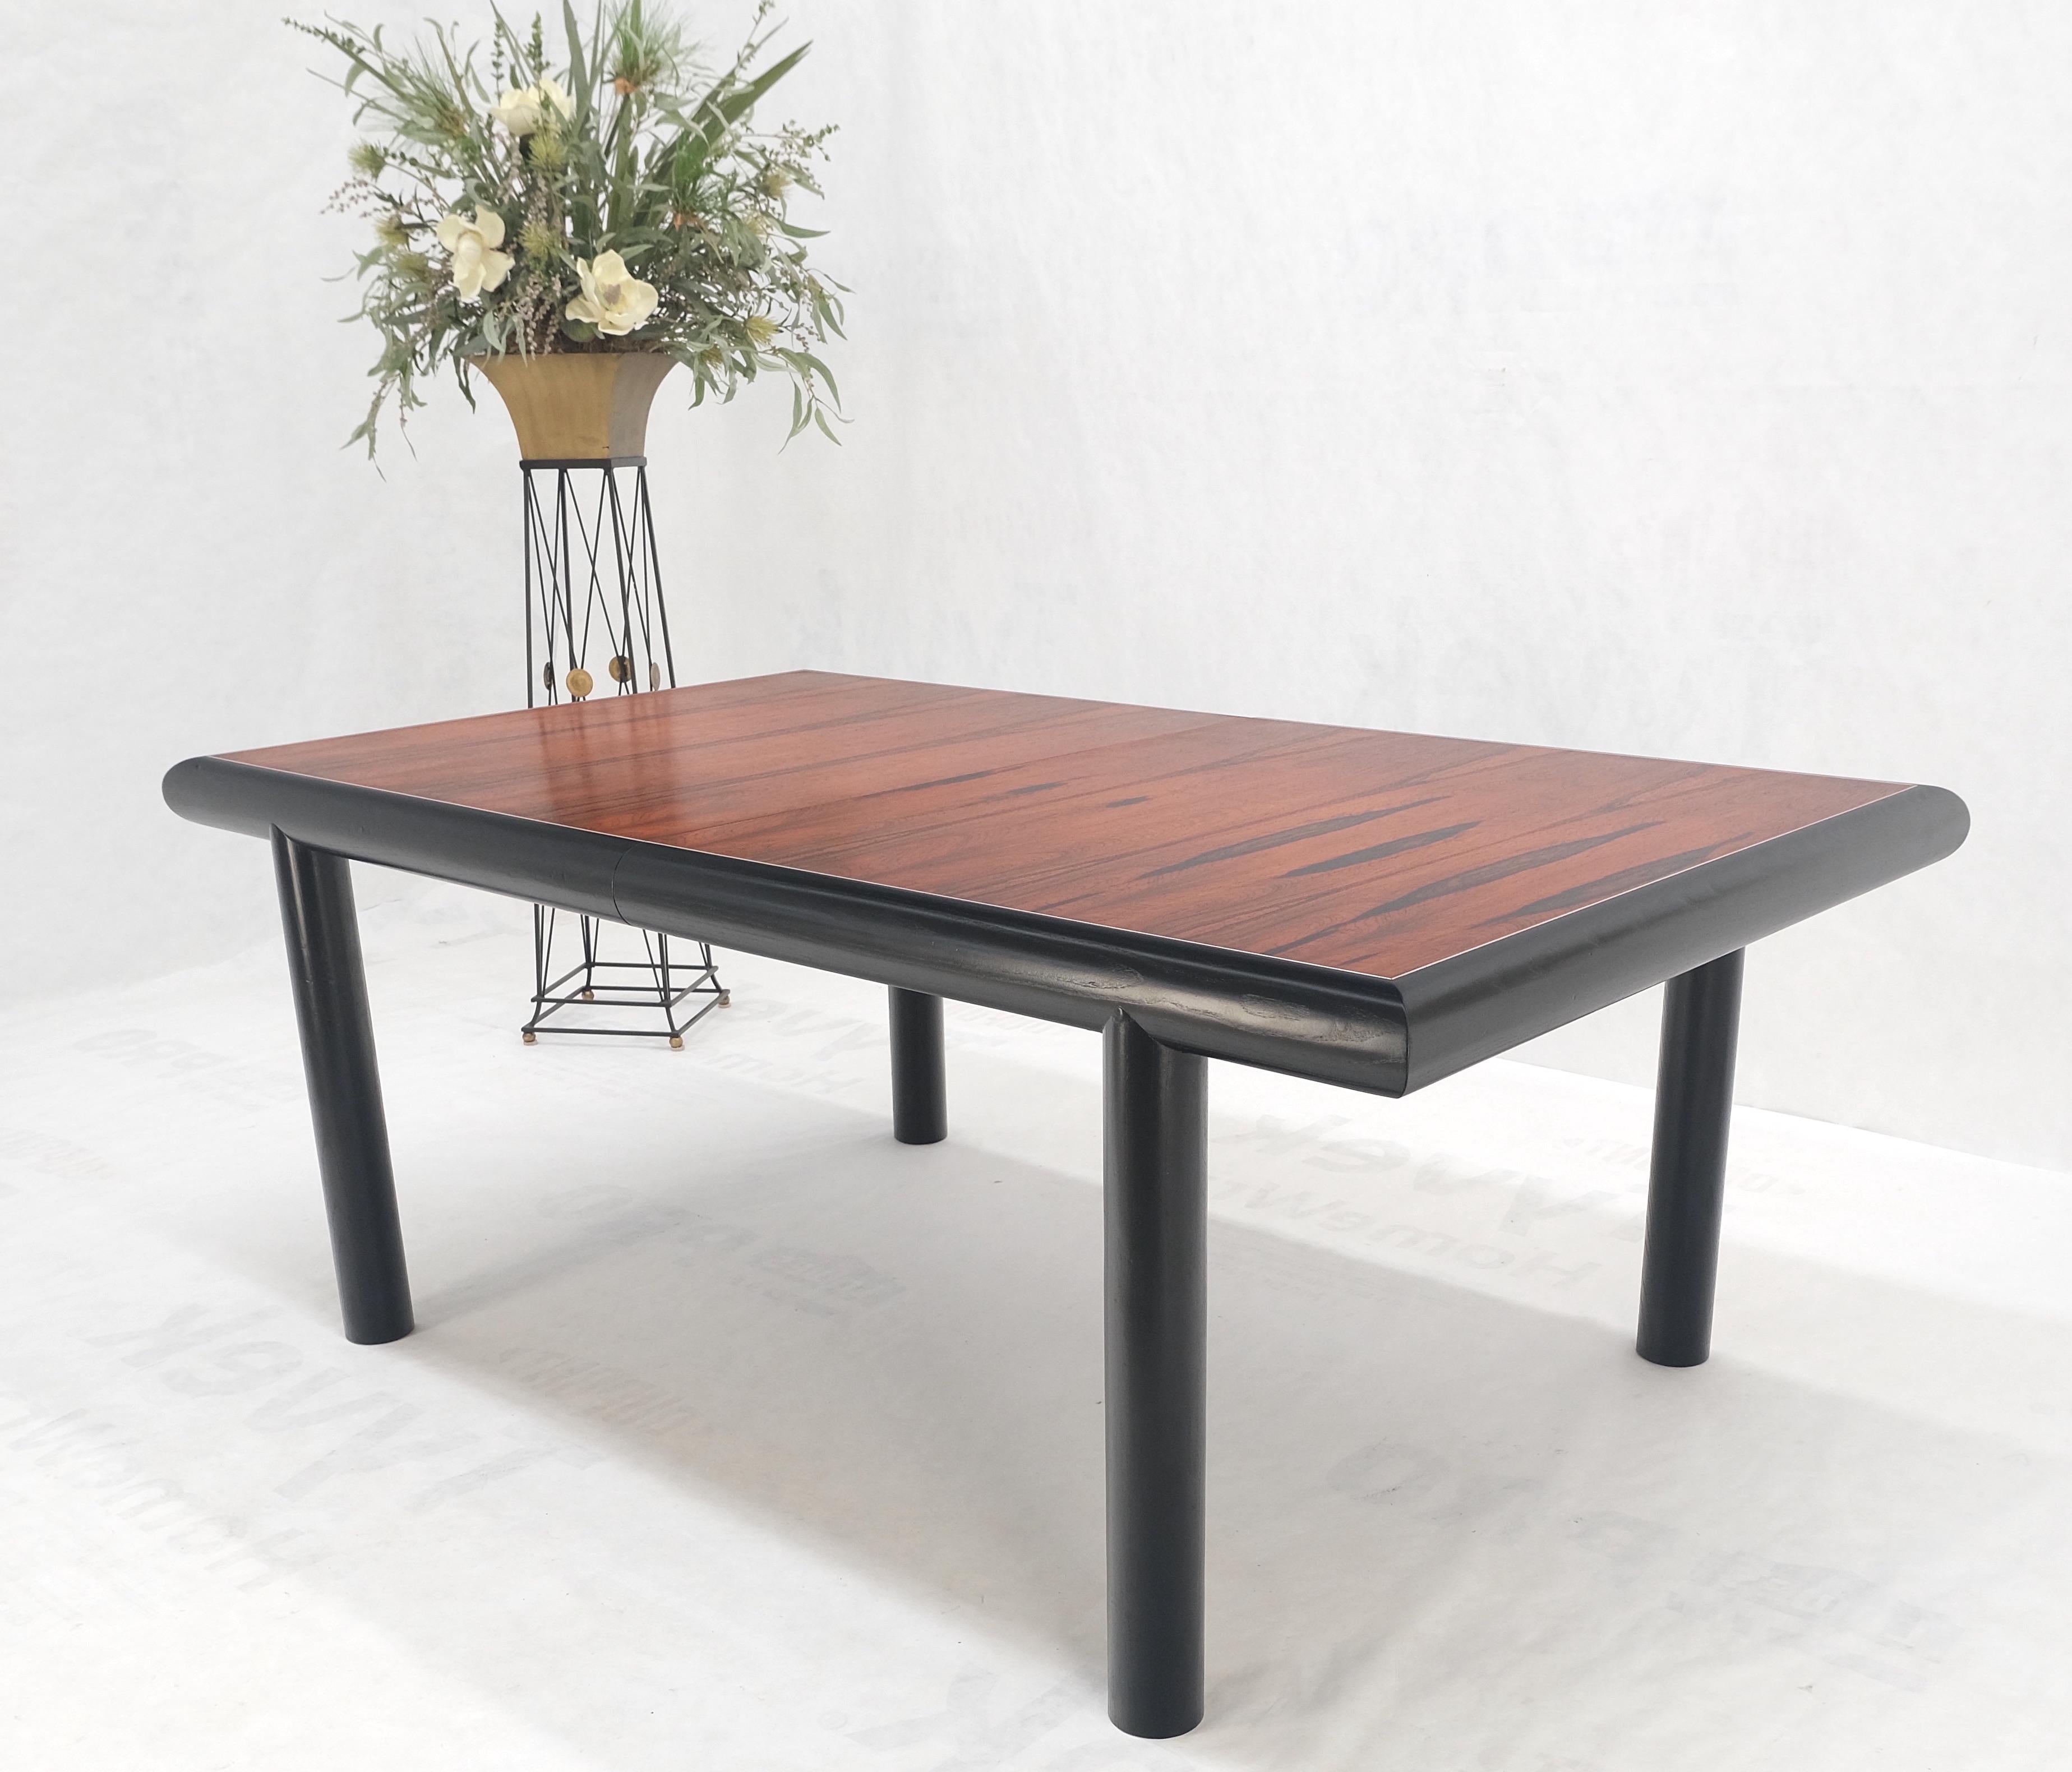 Rosewood Top Black Lacquer Base Massive Cylinder Shape Legs Dining Table MINT! For Sale 1